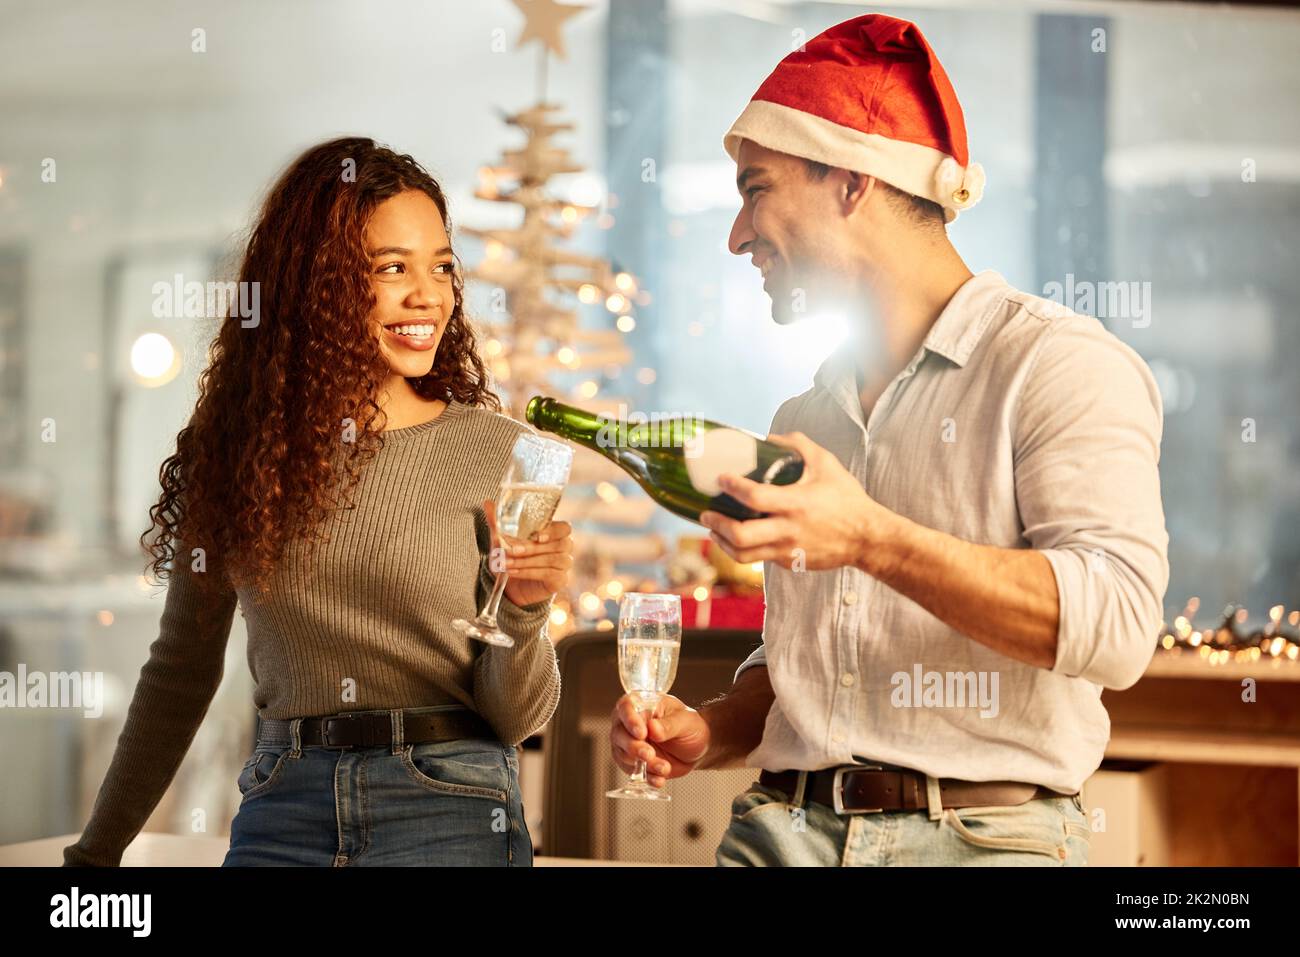 Whats a celebration without the champagne. Shot of two young businesspeople celebrating Christmas at work. Stock Photo